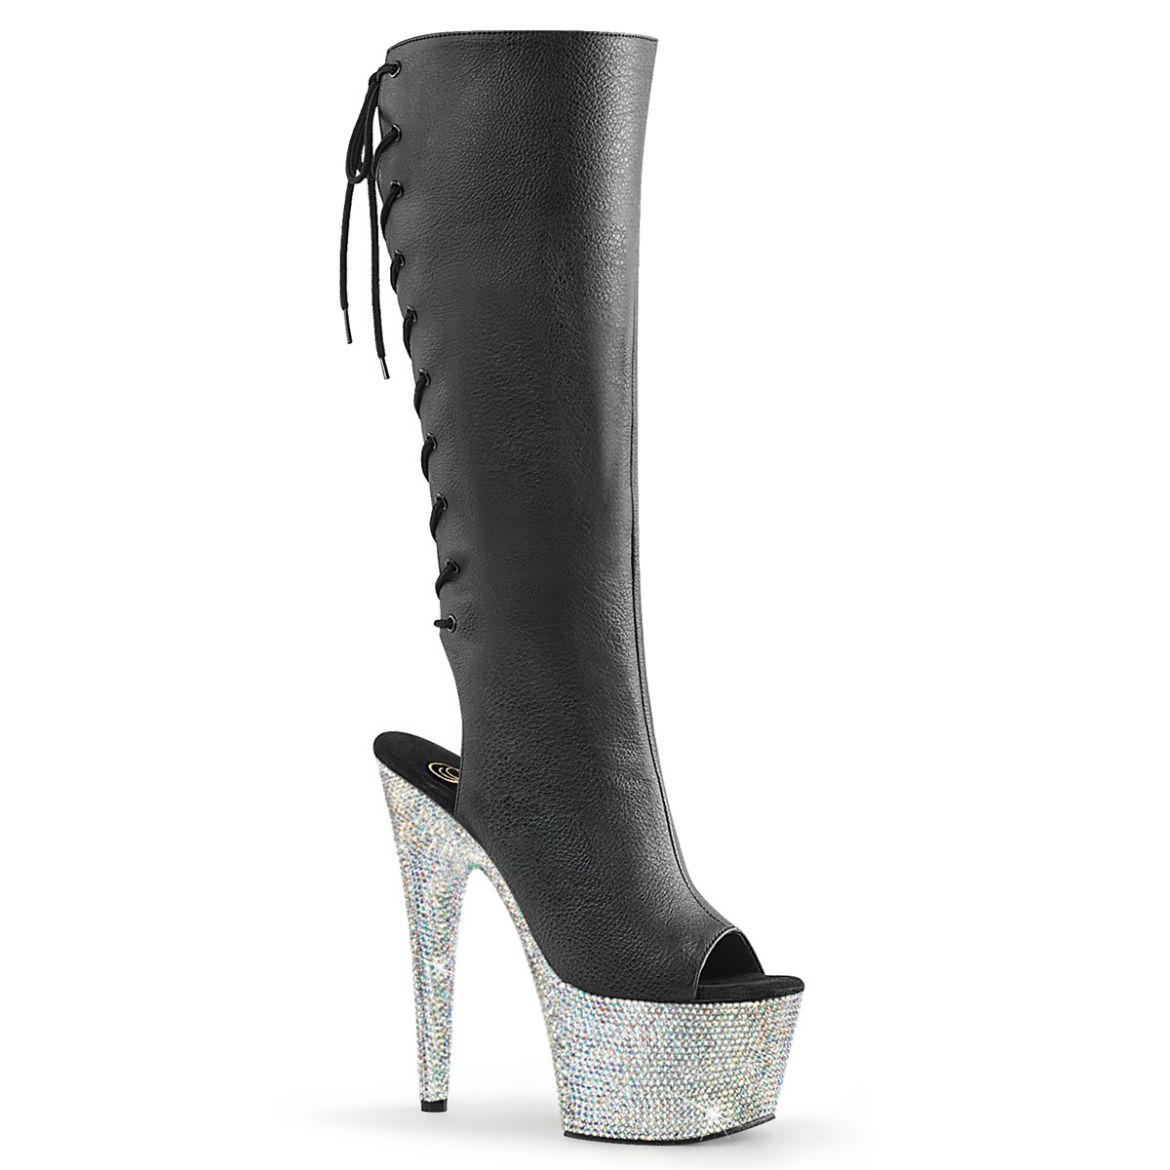 Product image of Pleaser BEJEWELED-2018-7 Blk Faux Leather/Slv AB RS 7 Inch Heel 2 3/4 Inch PF Open Toe/Heel Knee Boot w/RS Side Zip